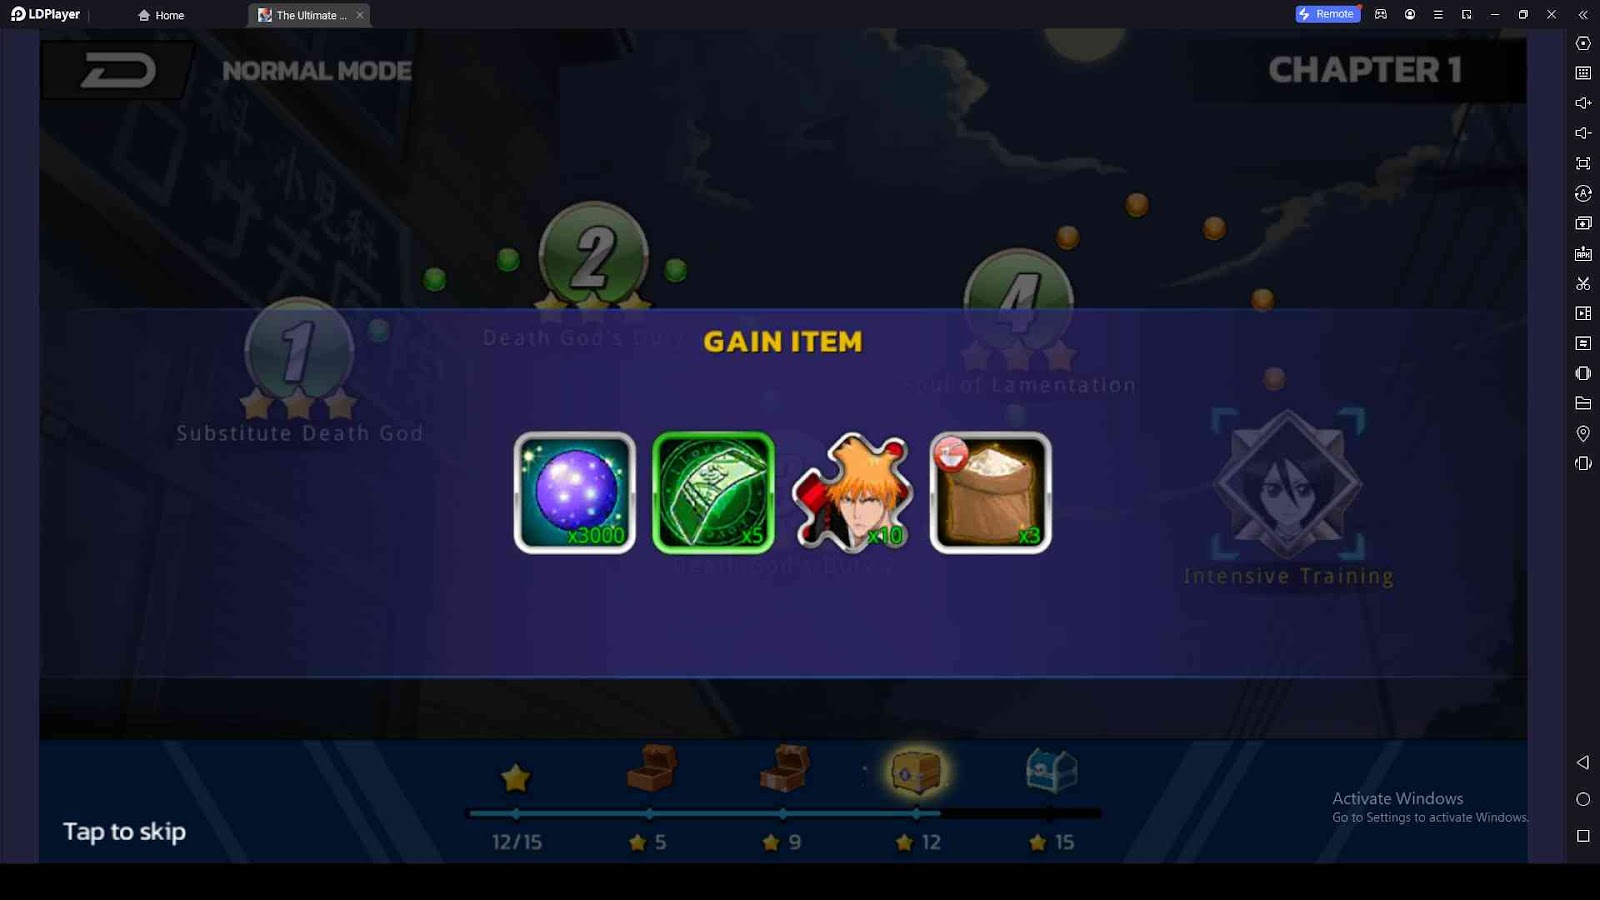 Collect More Stars to Unlock More Rewards in The Ultimate Battle